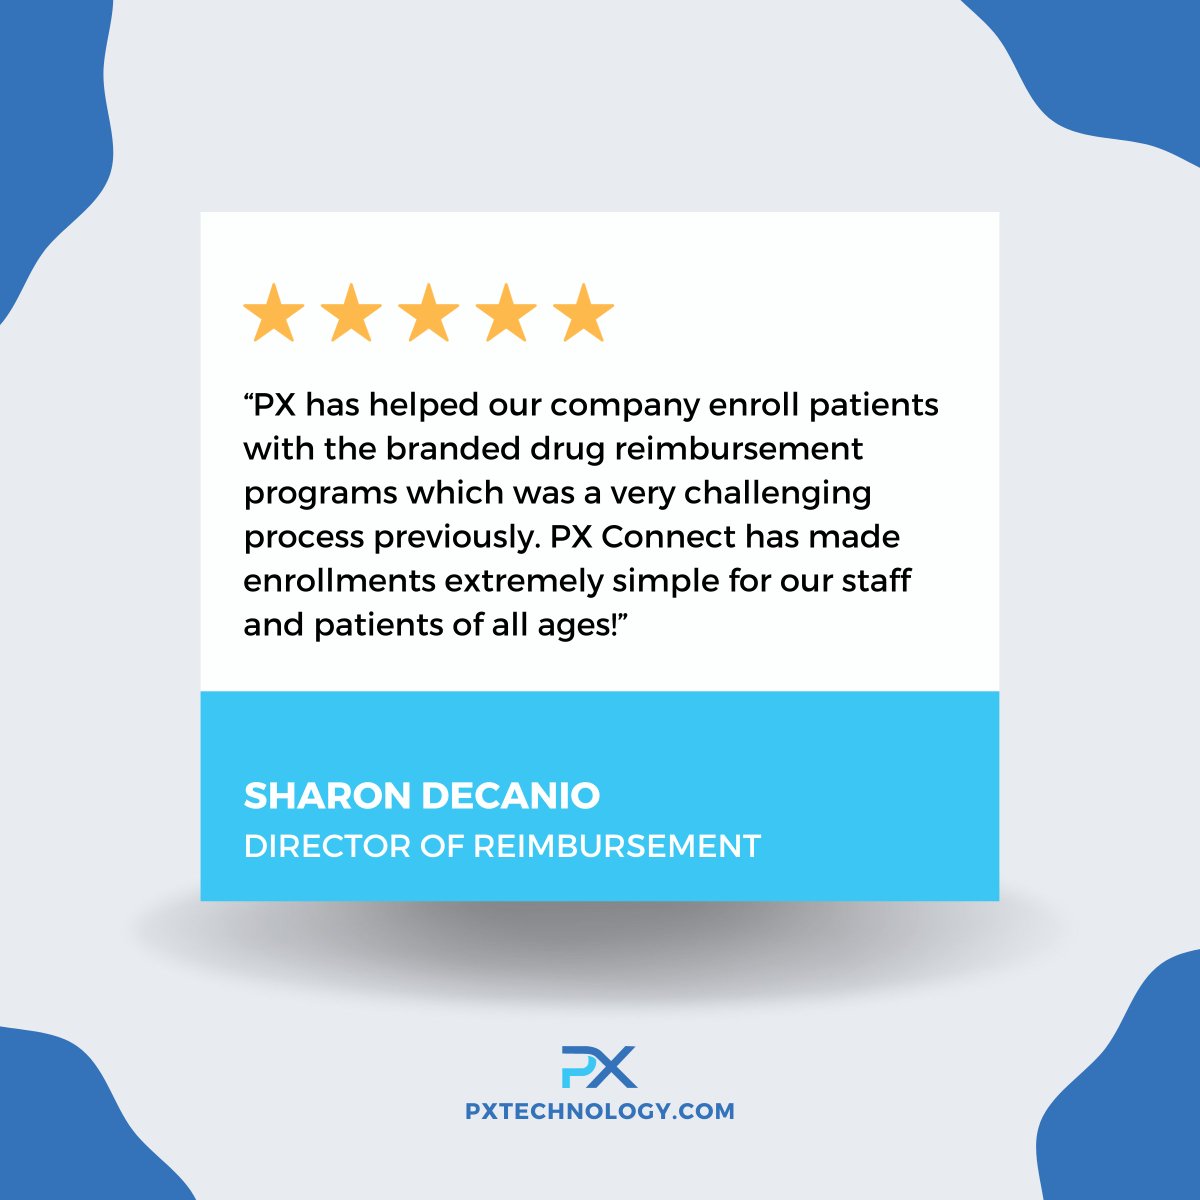 Are you ready to make your patient assistance application process more efficient? 'Extremely simple' for your staff and patients? We can assist your practice just like we helped Sharon and her team. Thank you for sharing with us, Sharon.